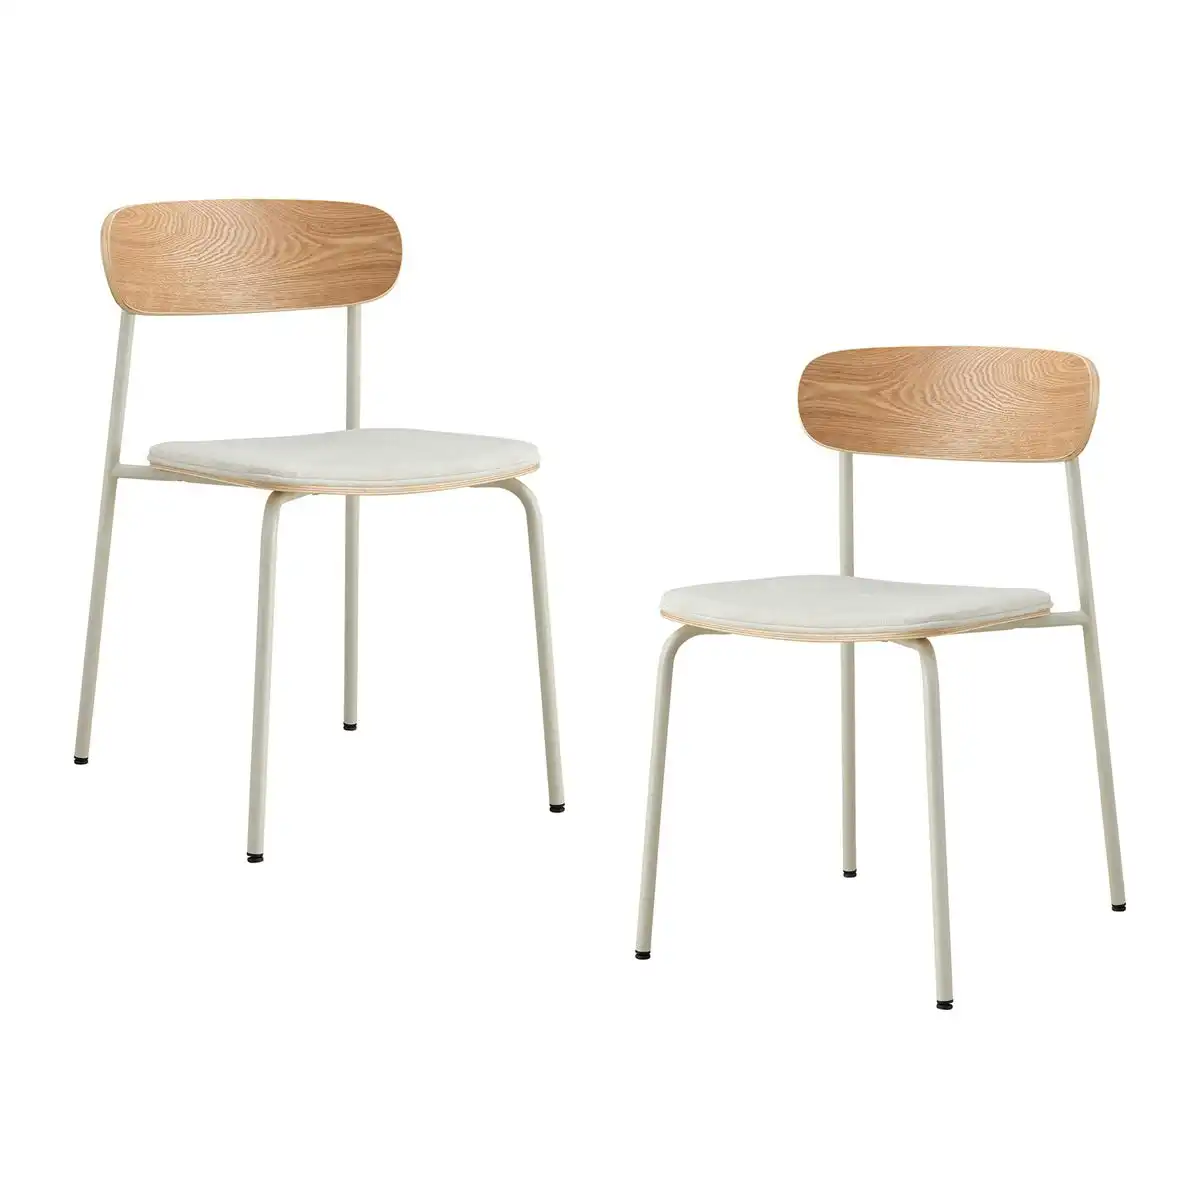 Cove Fabric Dining Chair Set of 2 (Cream, Ash)